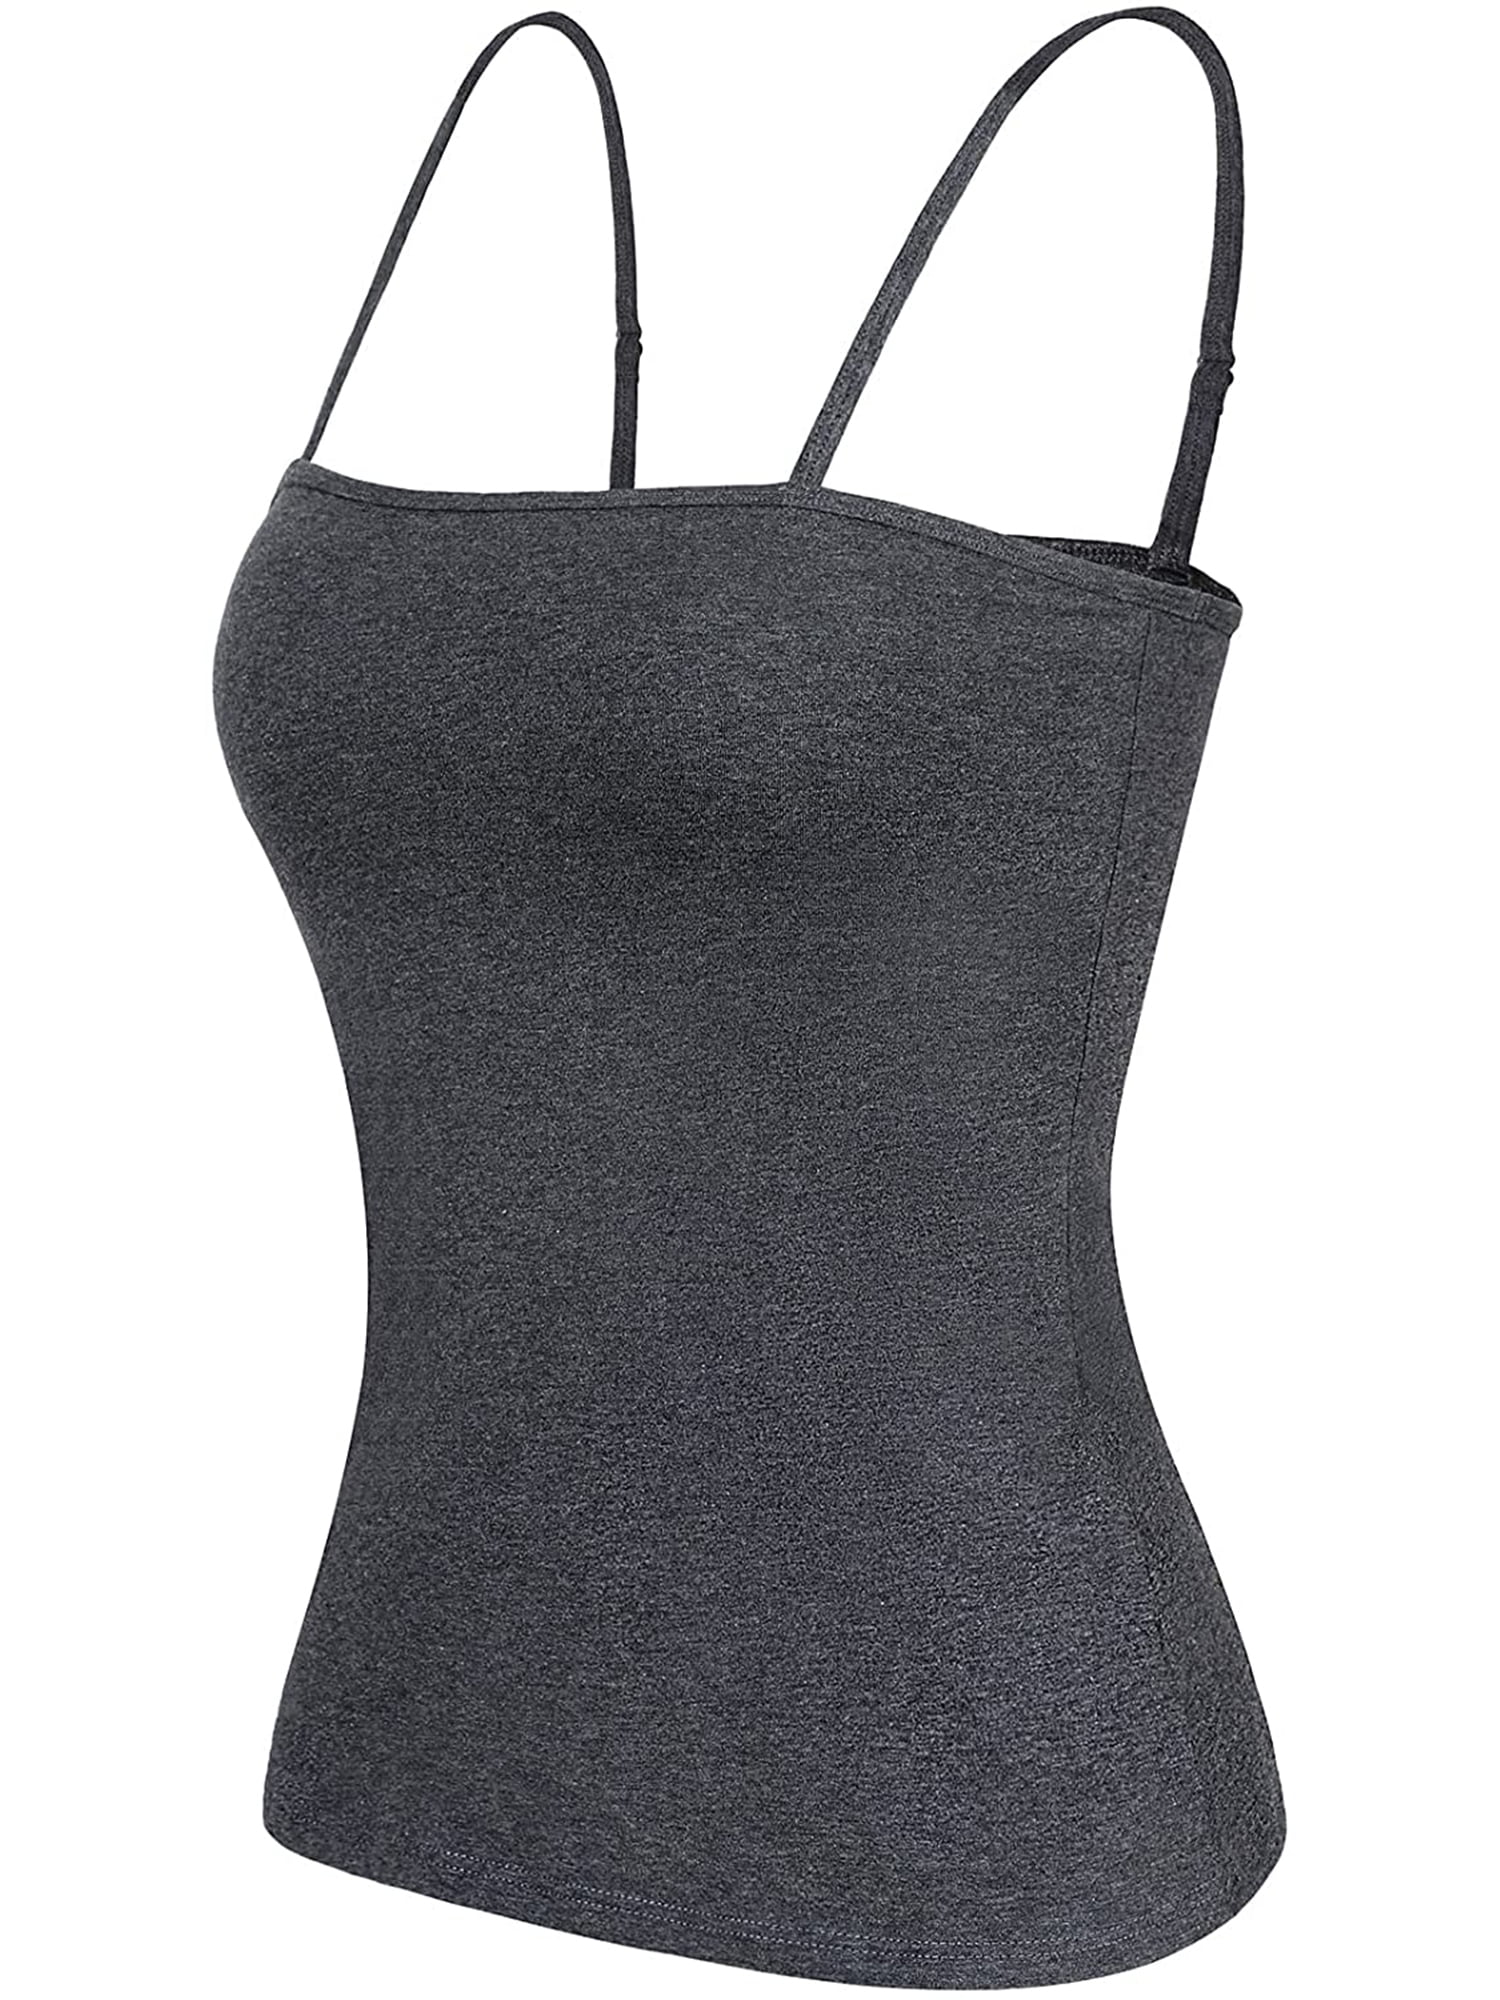 Difference between Tank Top and Camisole